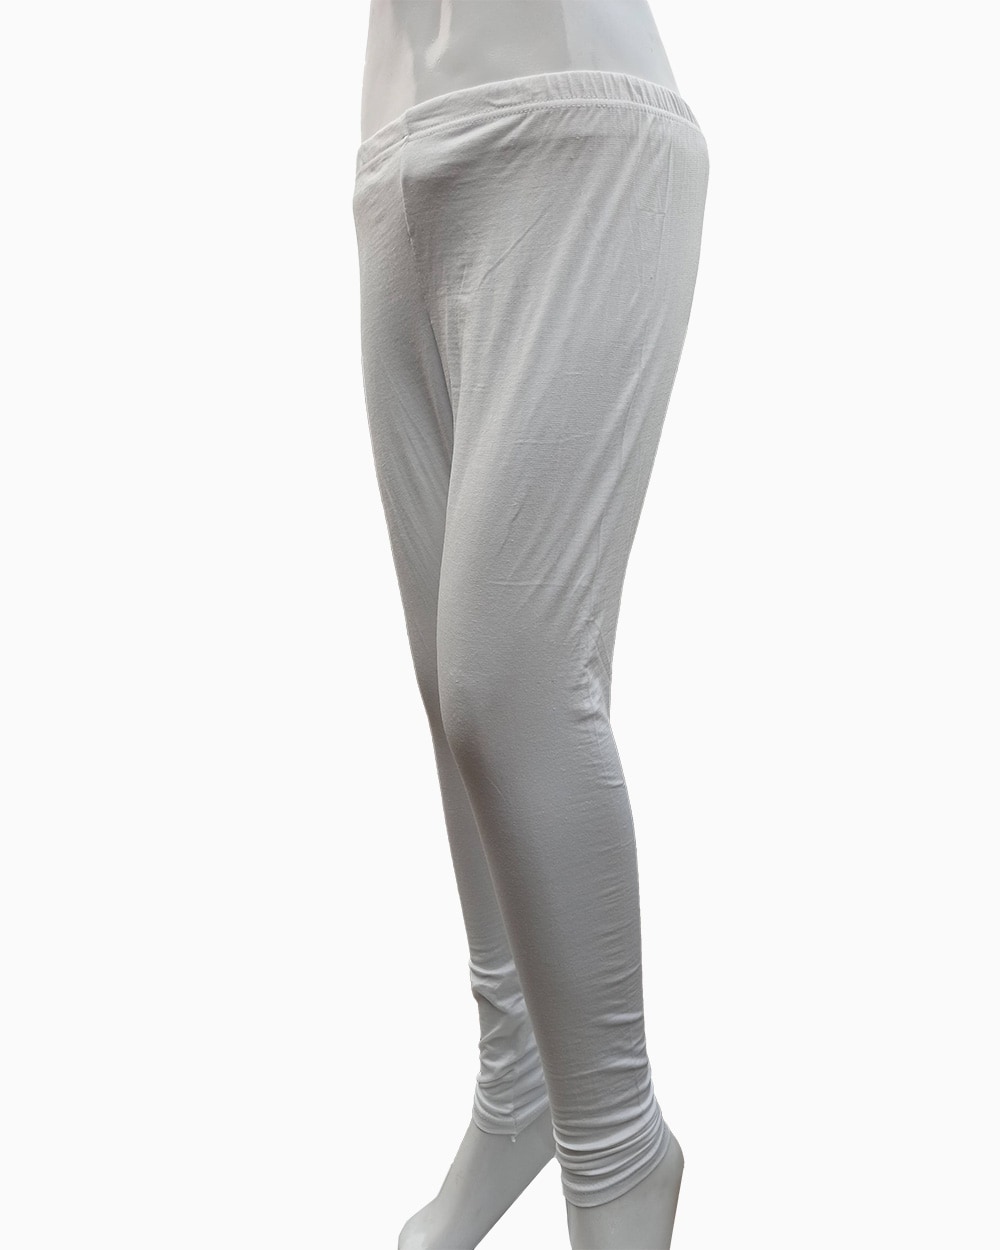 Lycra stretchable leggings (1)-white tights